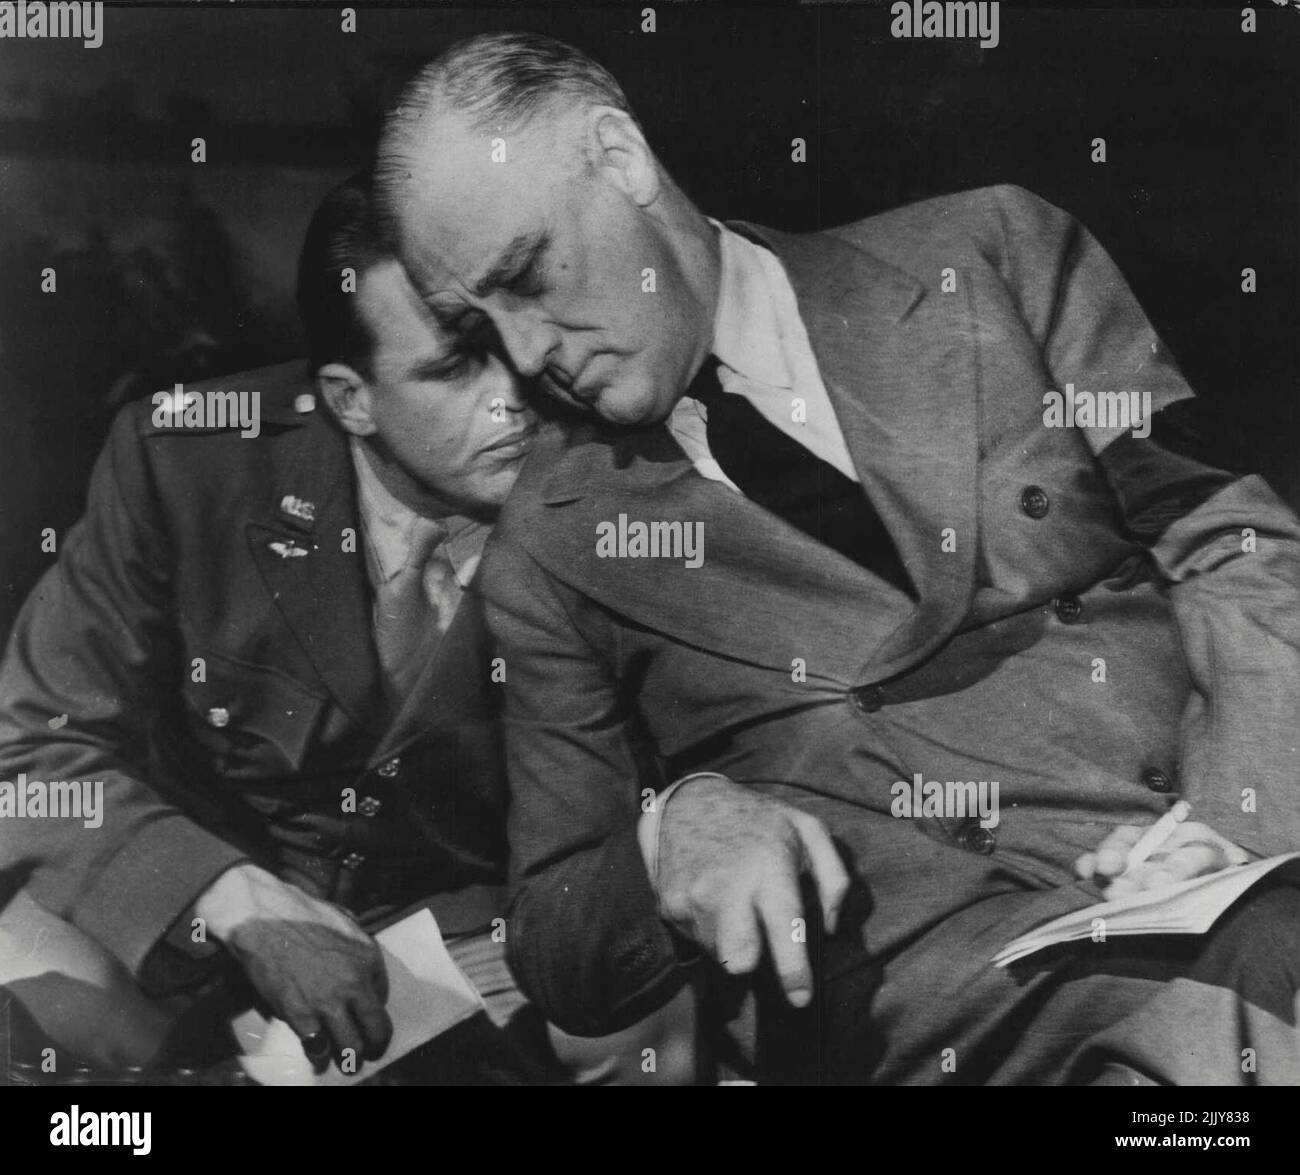 President Roosevelt Talks With His Son At Casablanca. President Franklin D. Roosevelt talks with his son, Lt. Col. Elliott Roosevelt, during the historic Allied conference at Casablanca. Lt, Col, Roosevelt is attached to a photographic unit of the U.S. Army Air Forces operating in North Africa. March 29, 1943. (Photo by Interphoto News Pictures, Inc.). Stock Photo